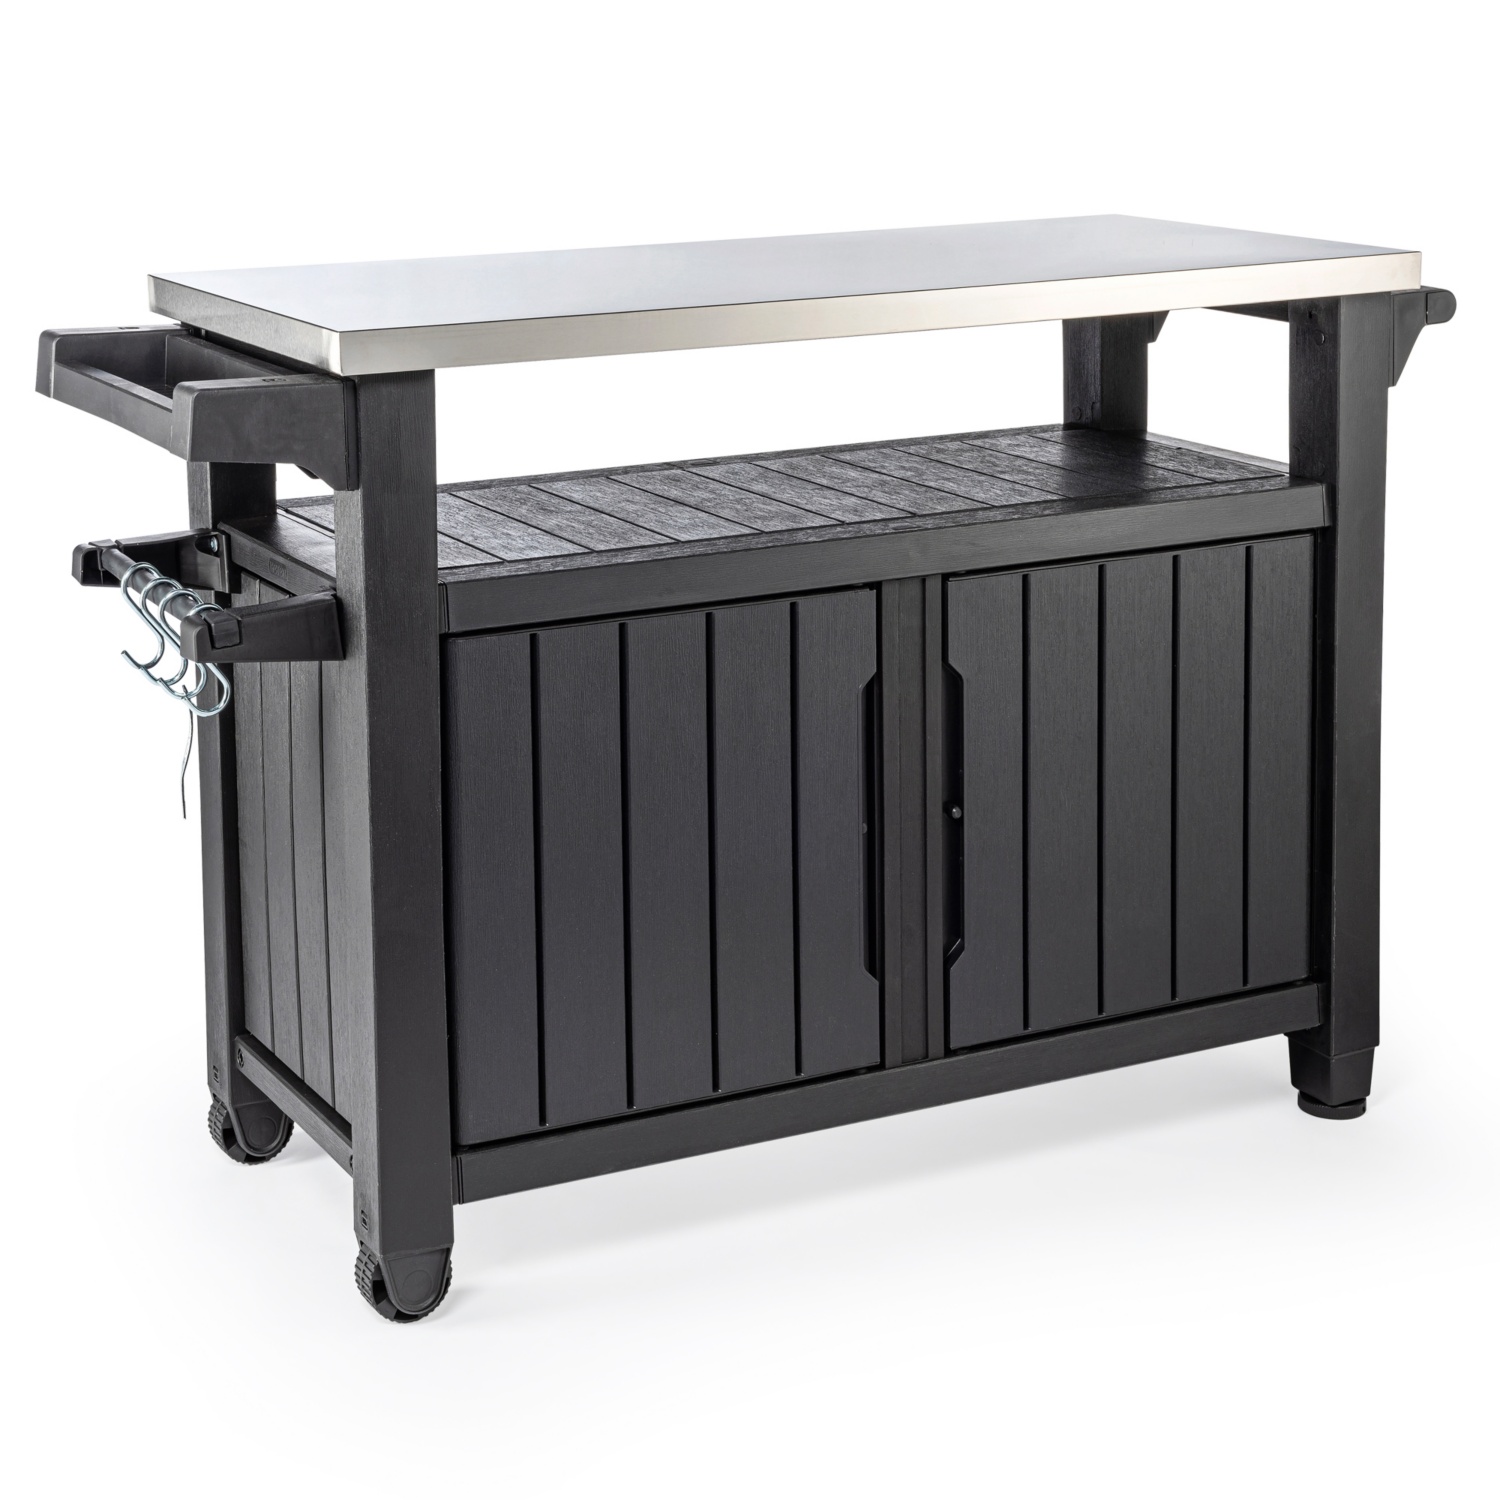 KETER Table d’appoint pour barbecue XL